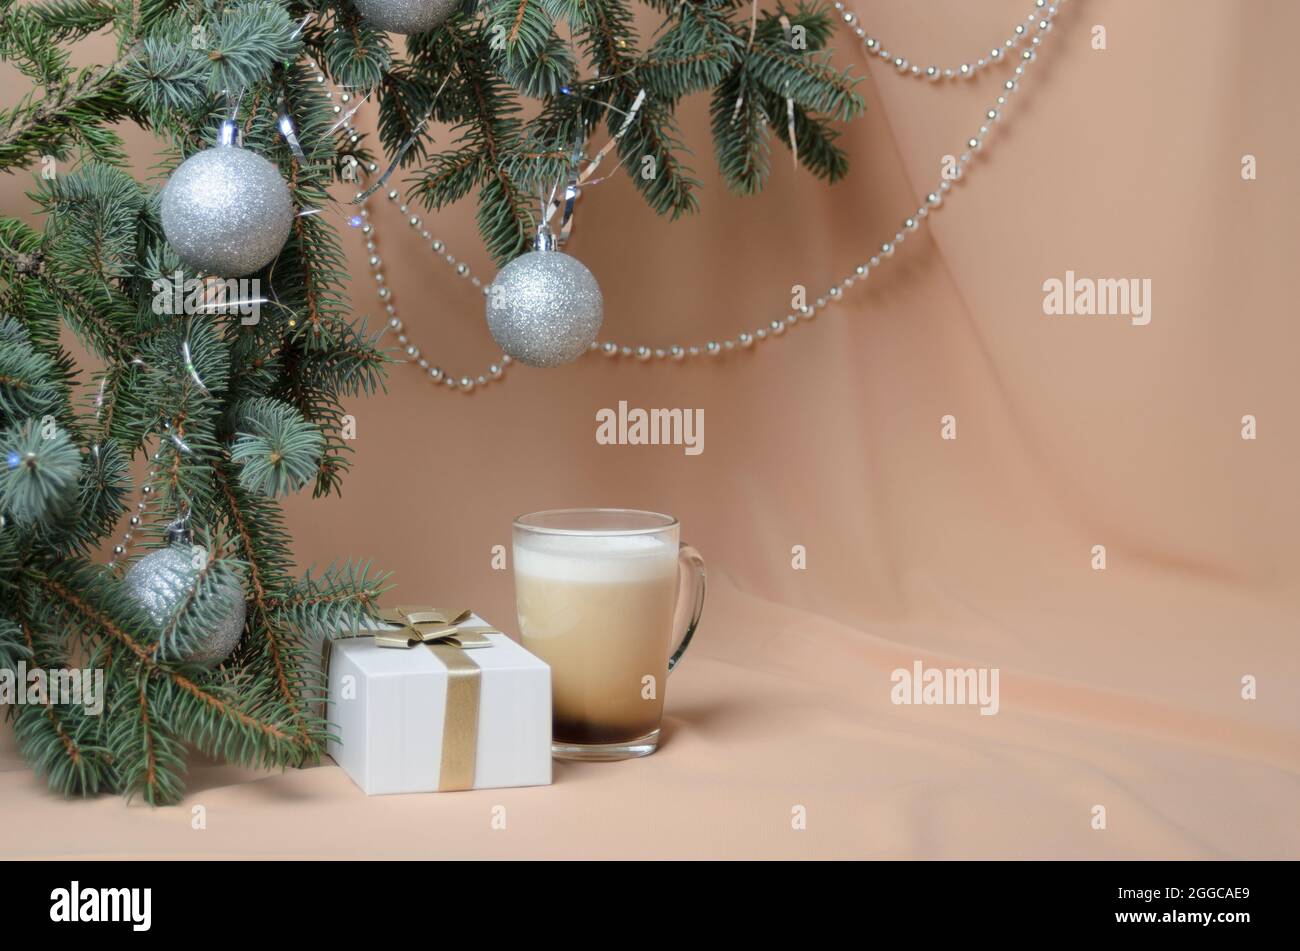 A New Year's composition made of branches of a Christmas tree, decorated with silver balls, a gift box, a glass mug with coffee and milk on the backgr Stock Photo